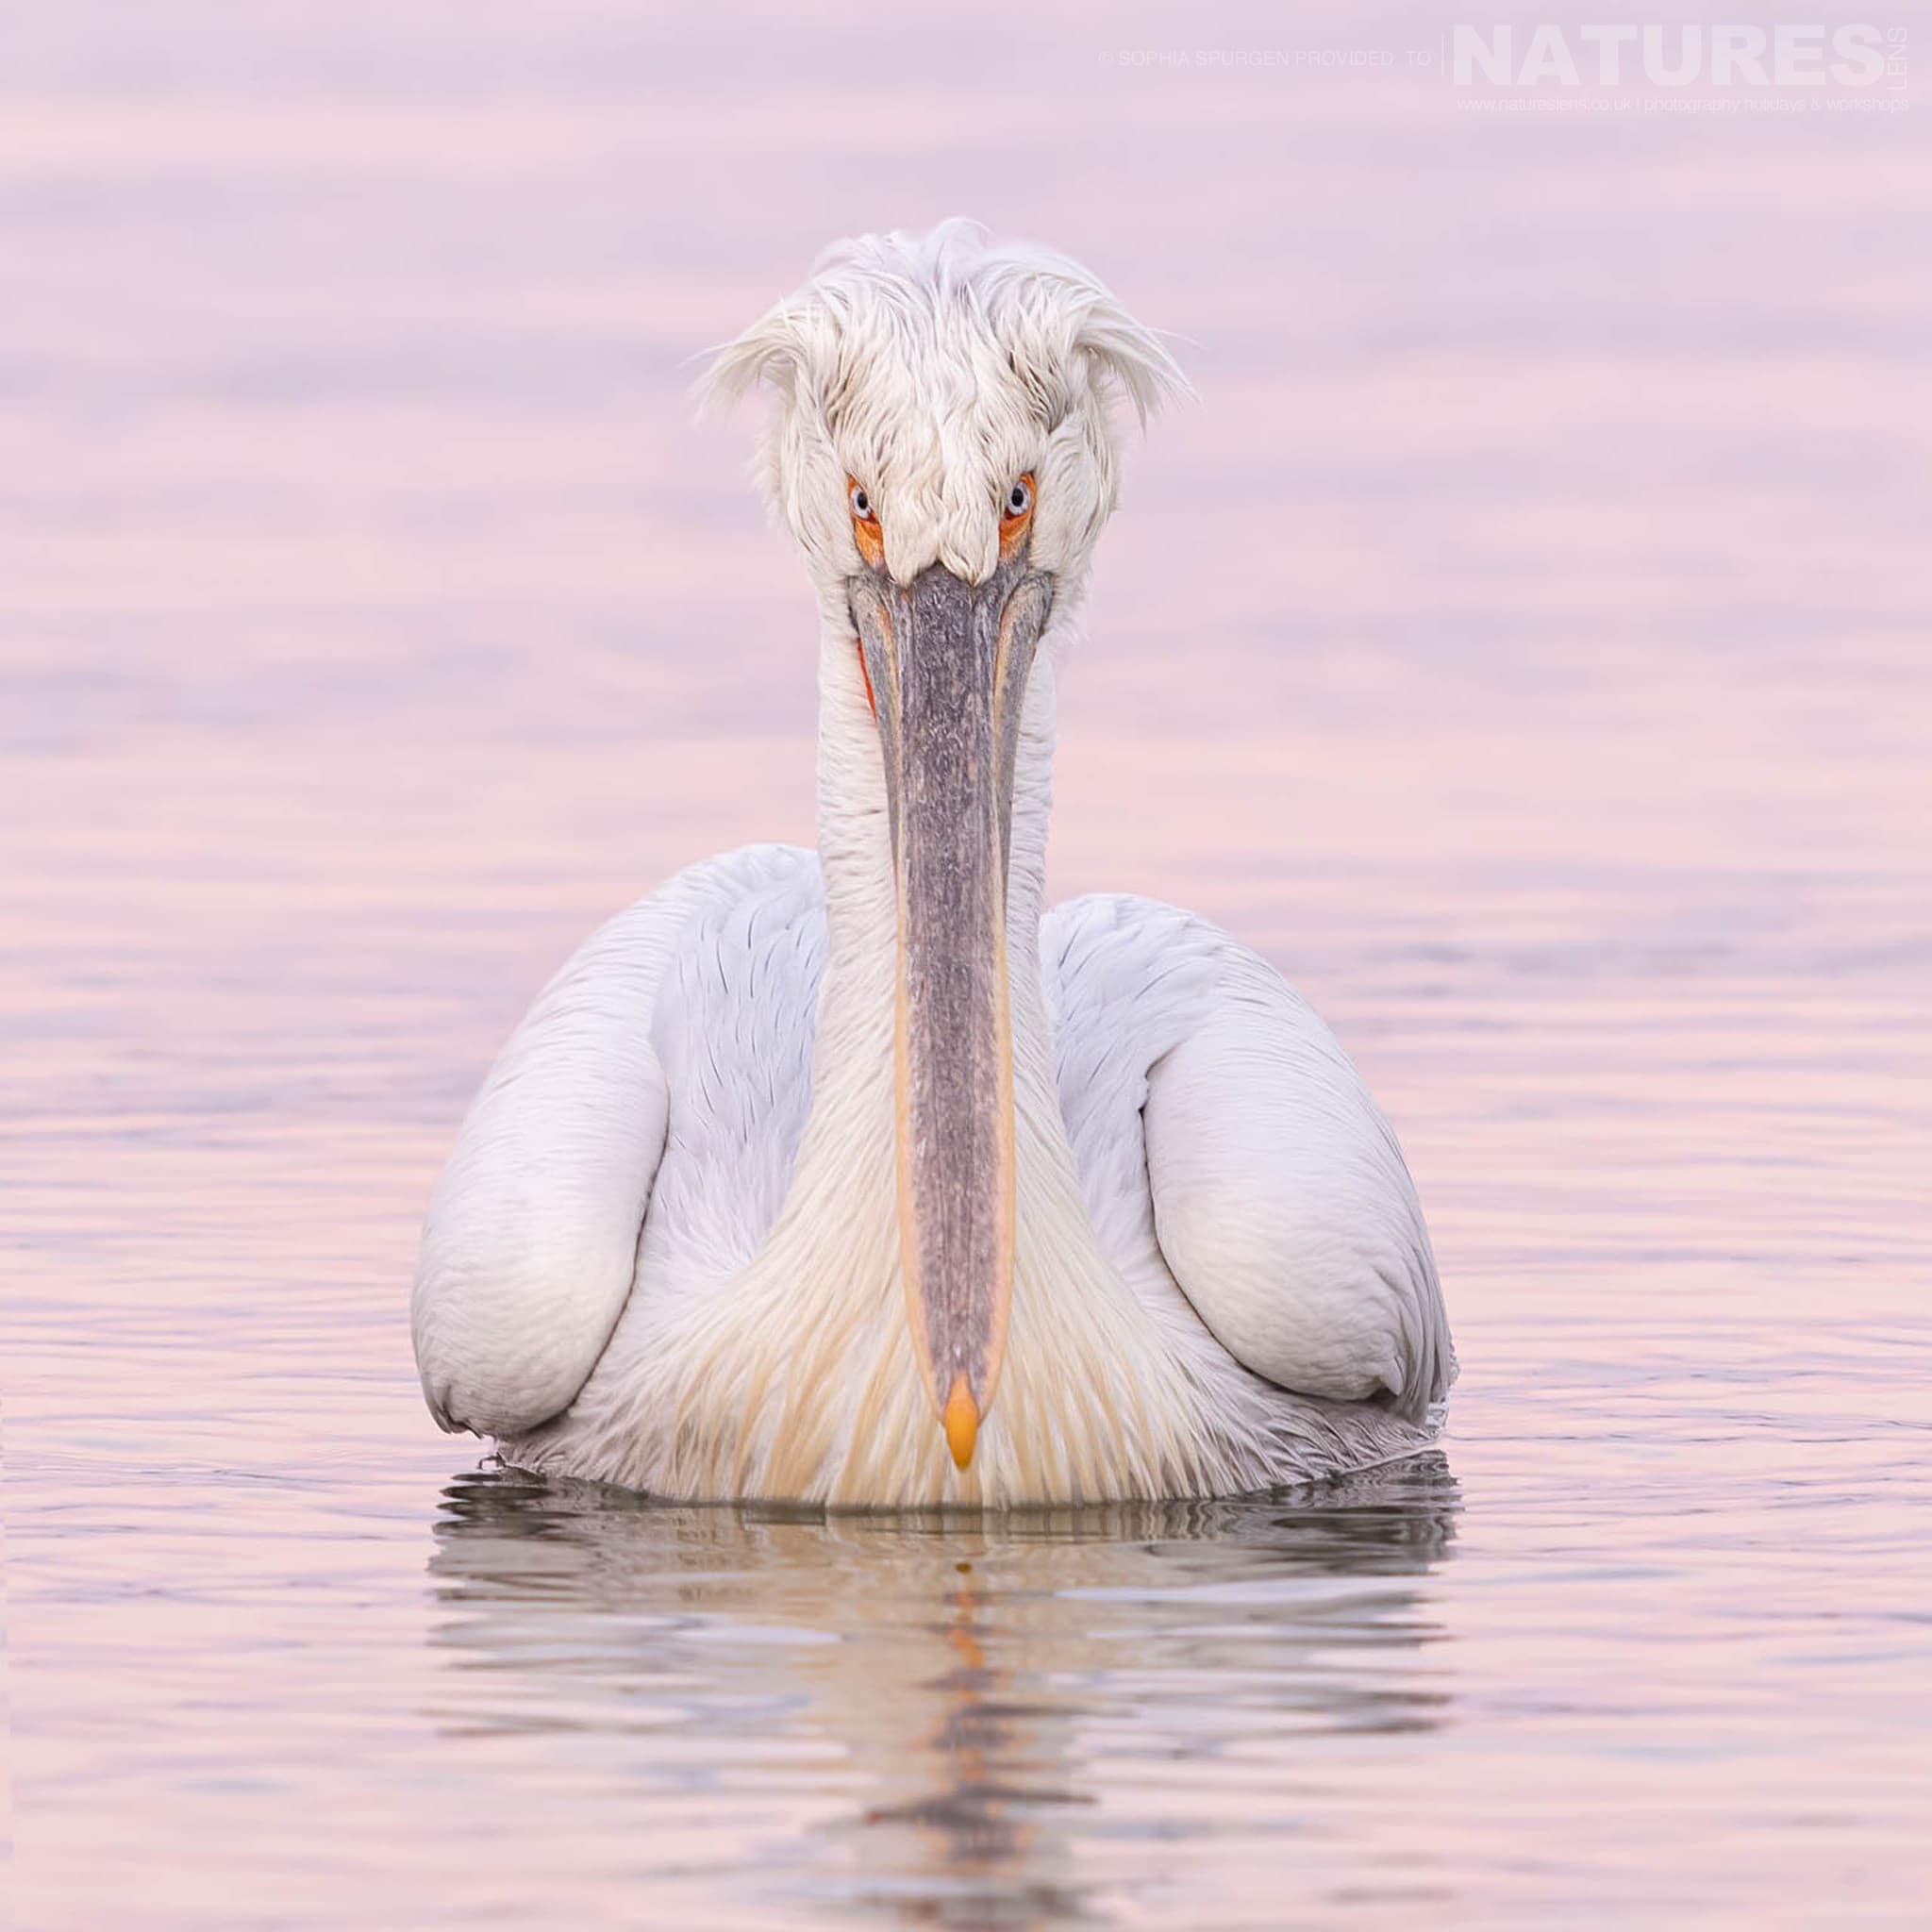 One Of The Dalmatian Pelicans Of Greece Gliding On The Waters Of Lake Kerkini In Soft Evening Light